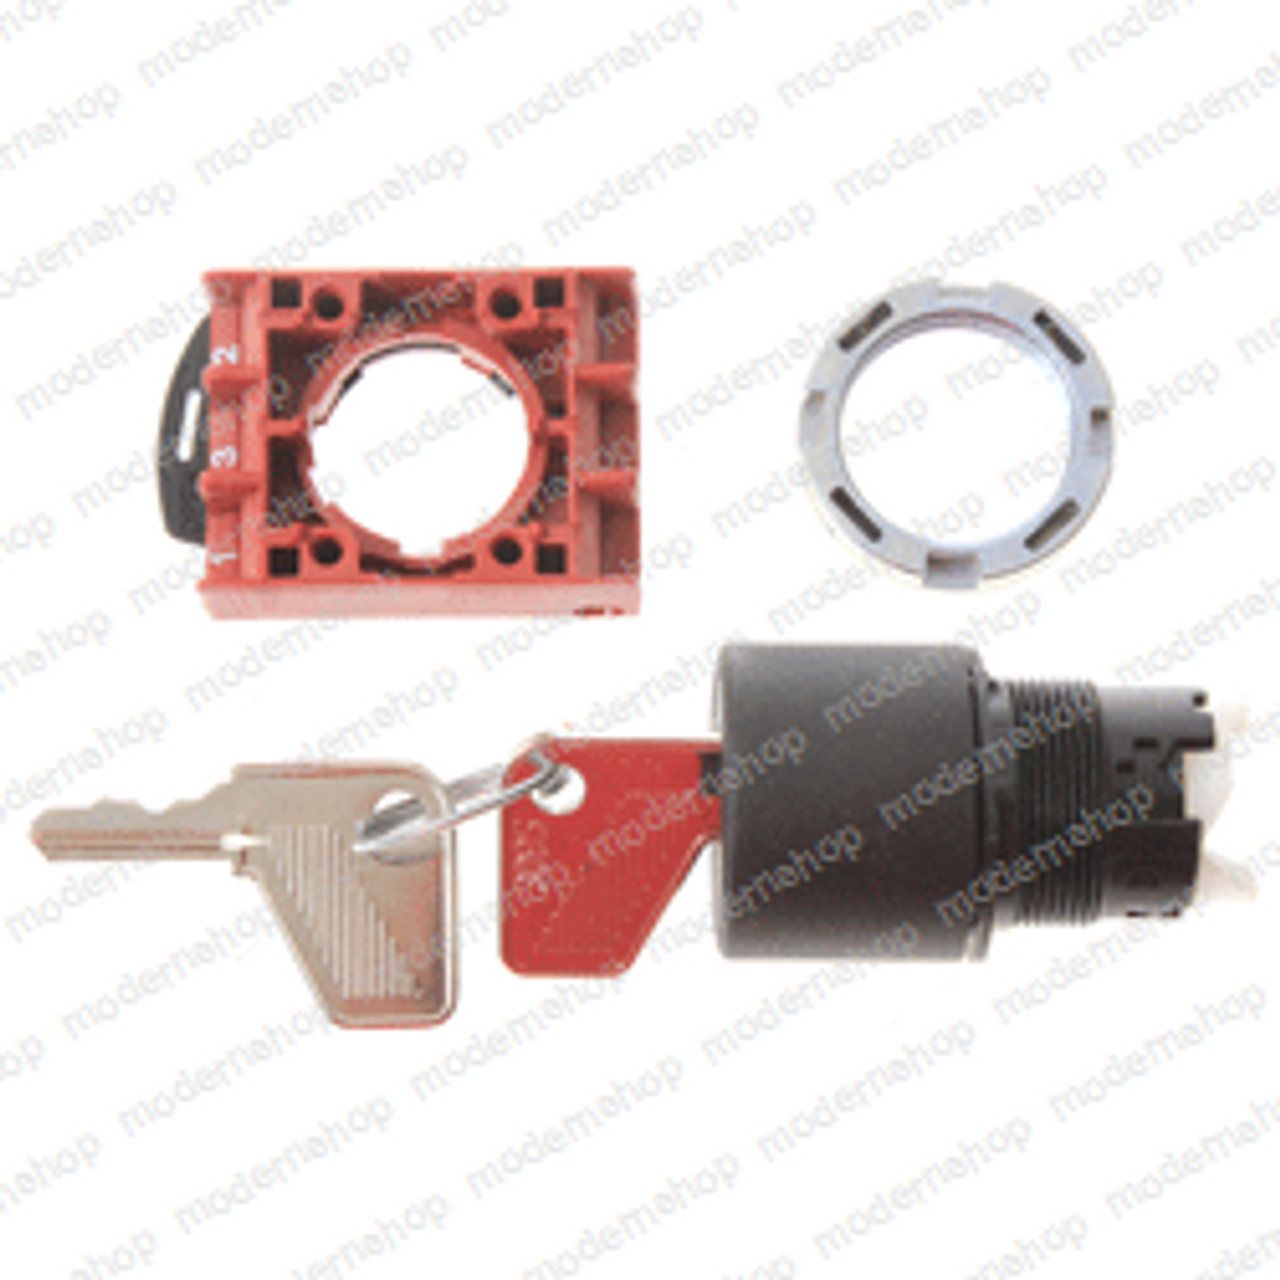 068807-000: Upright SWITCH - SELECTOR